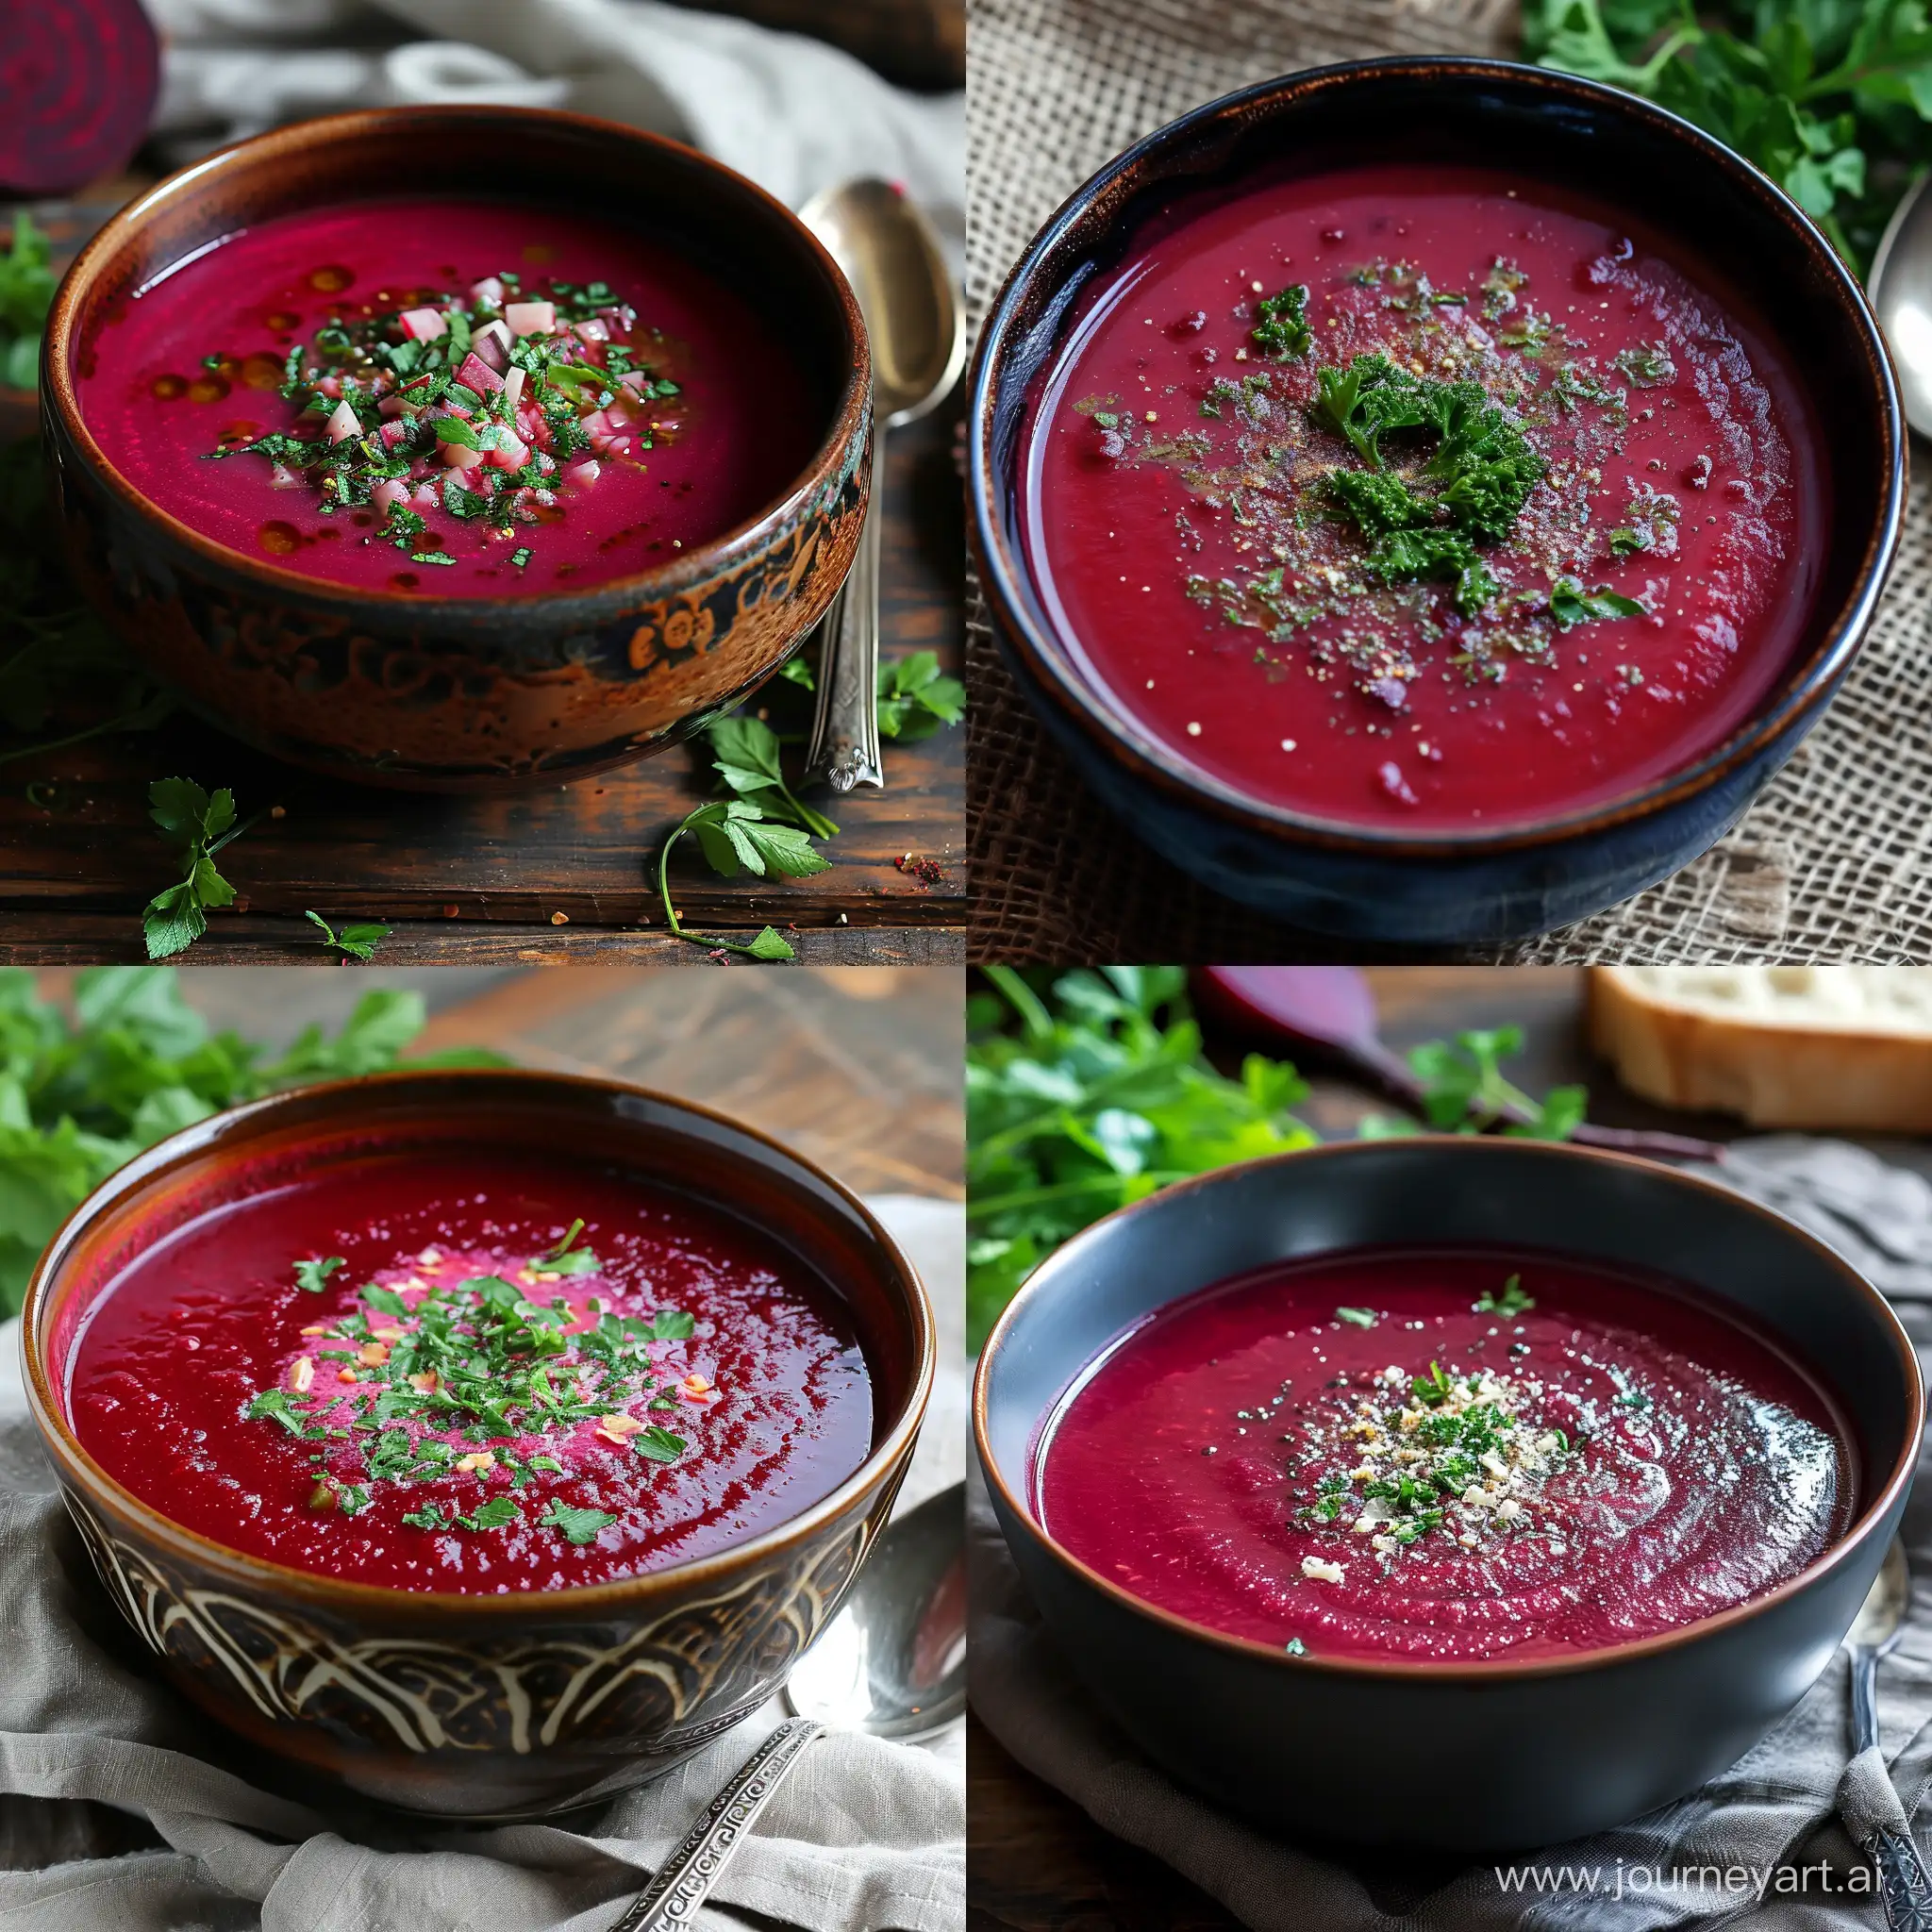 Vibrant-Beet-Soup-Recipe-with-Artistic-Presentation